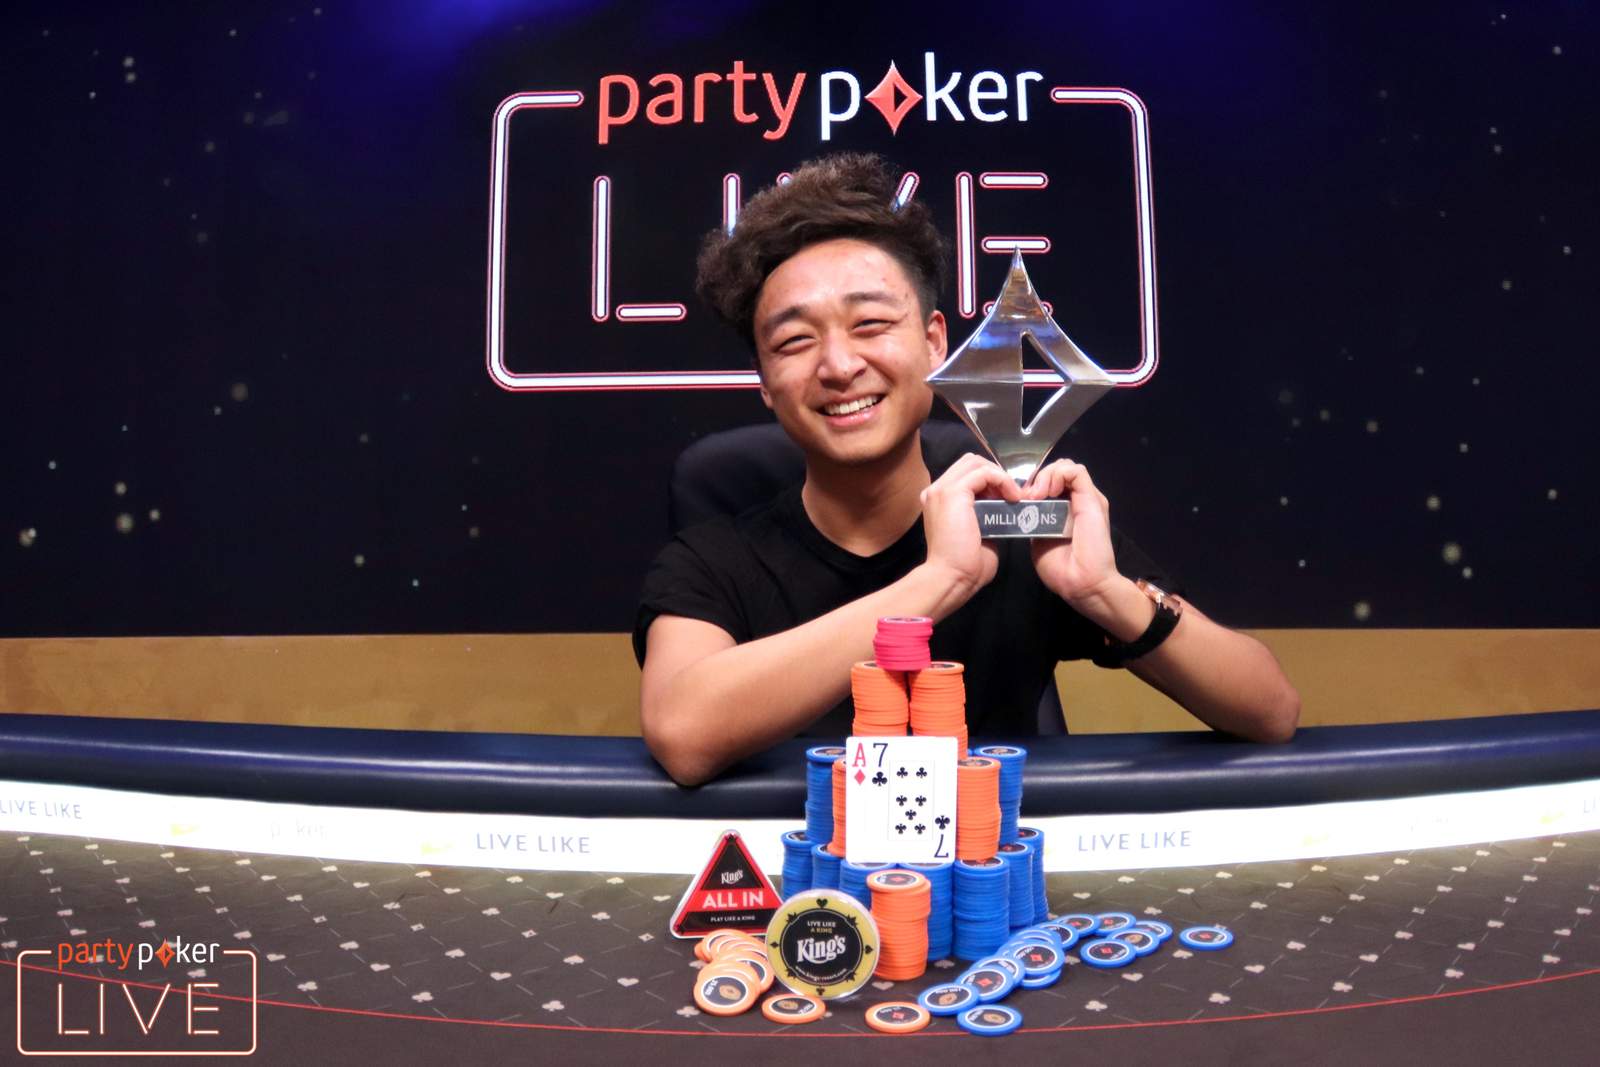 Michael Zhang Wins Super High Roller at partypoker MILLIONS for €350,000